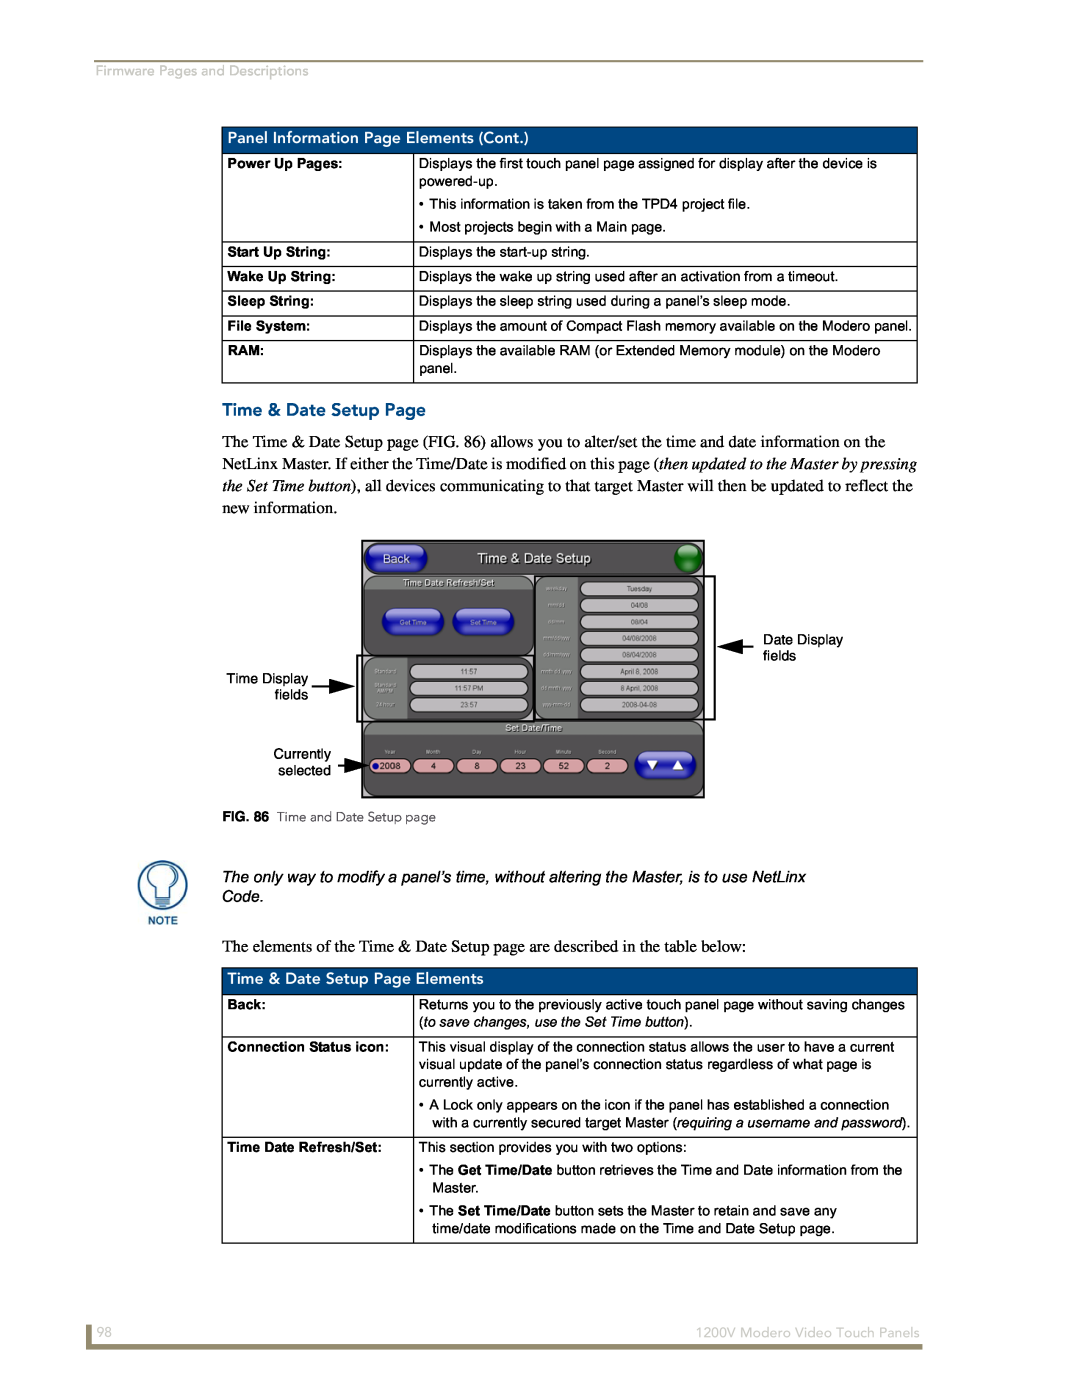 AMX NXT-1200V manual Panel Information Page Elements Cont, Time & Date Setup Page Elements 